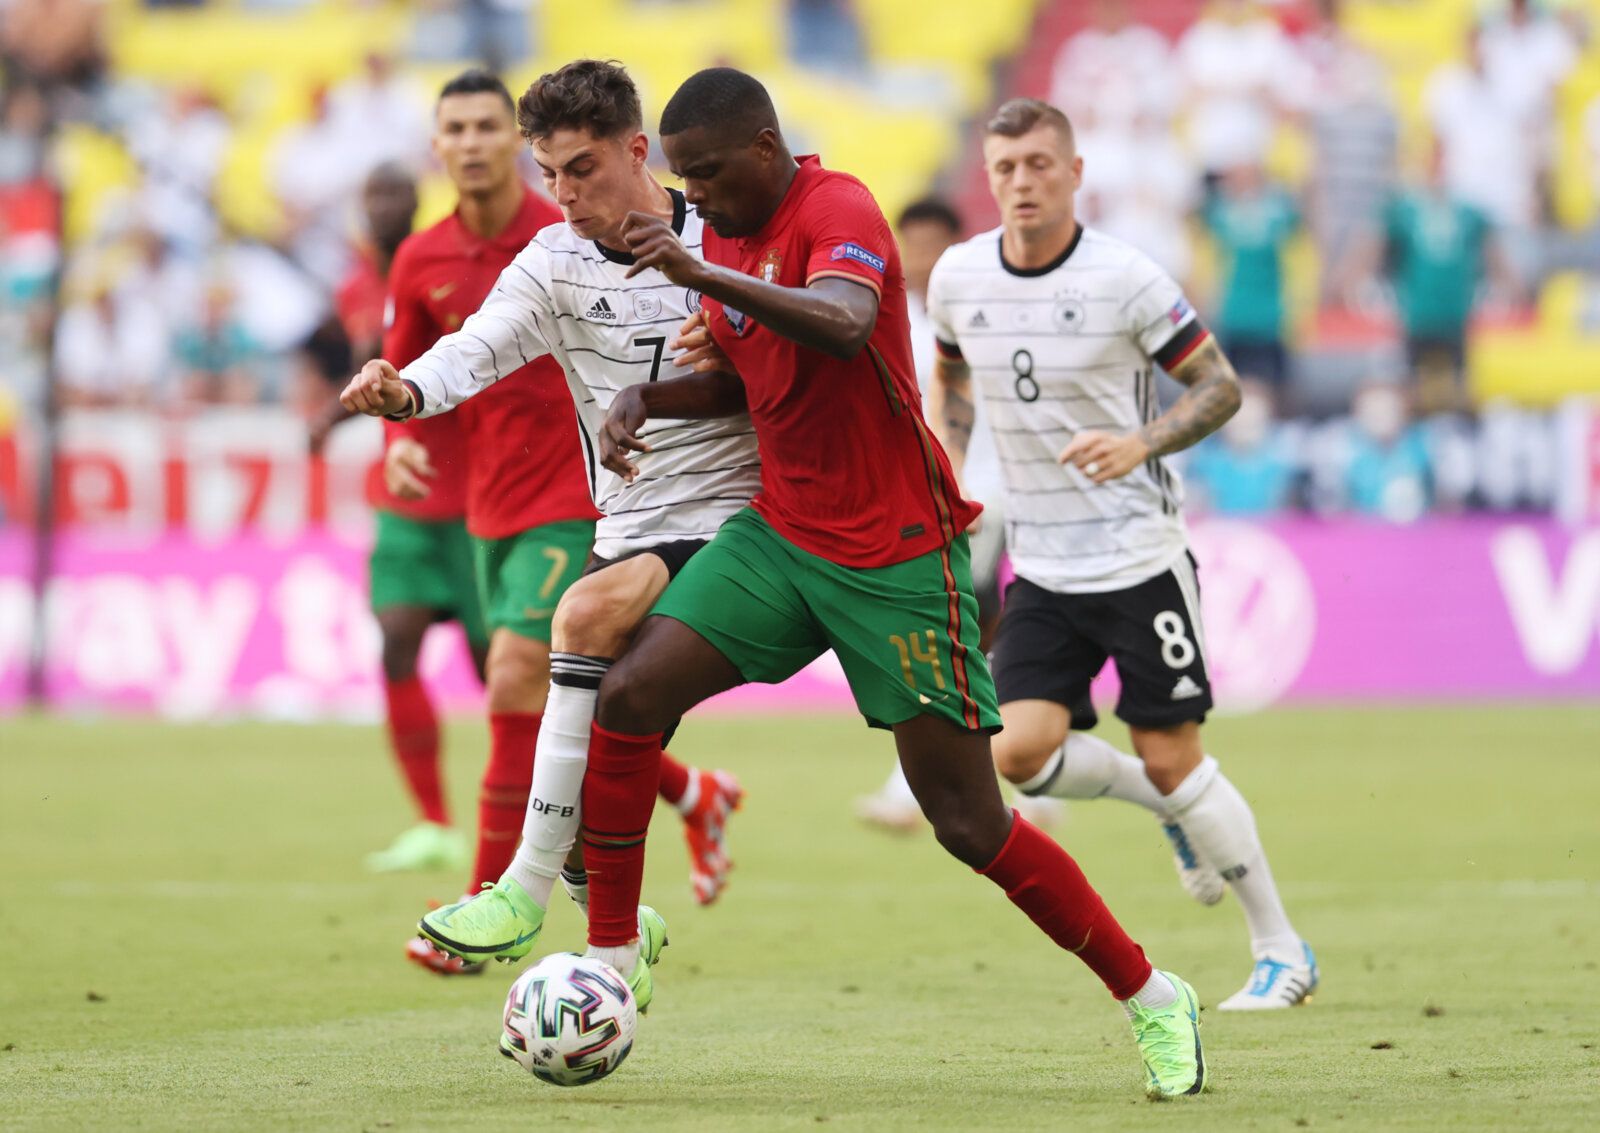 Soccer Football - Euro 2020 - Group F - Portugal v Germany - Football Arena Munich, Munich, Germany - June 19, 2021 Portugal's William Carvalho in action with Germany's Kai Havertz Pool via REUTERS/Alexander Hassenstein